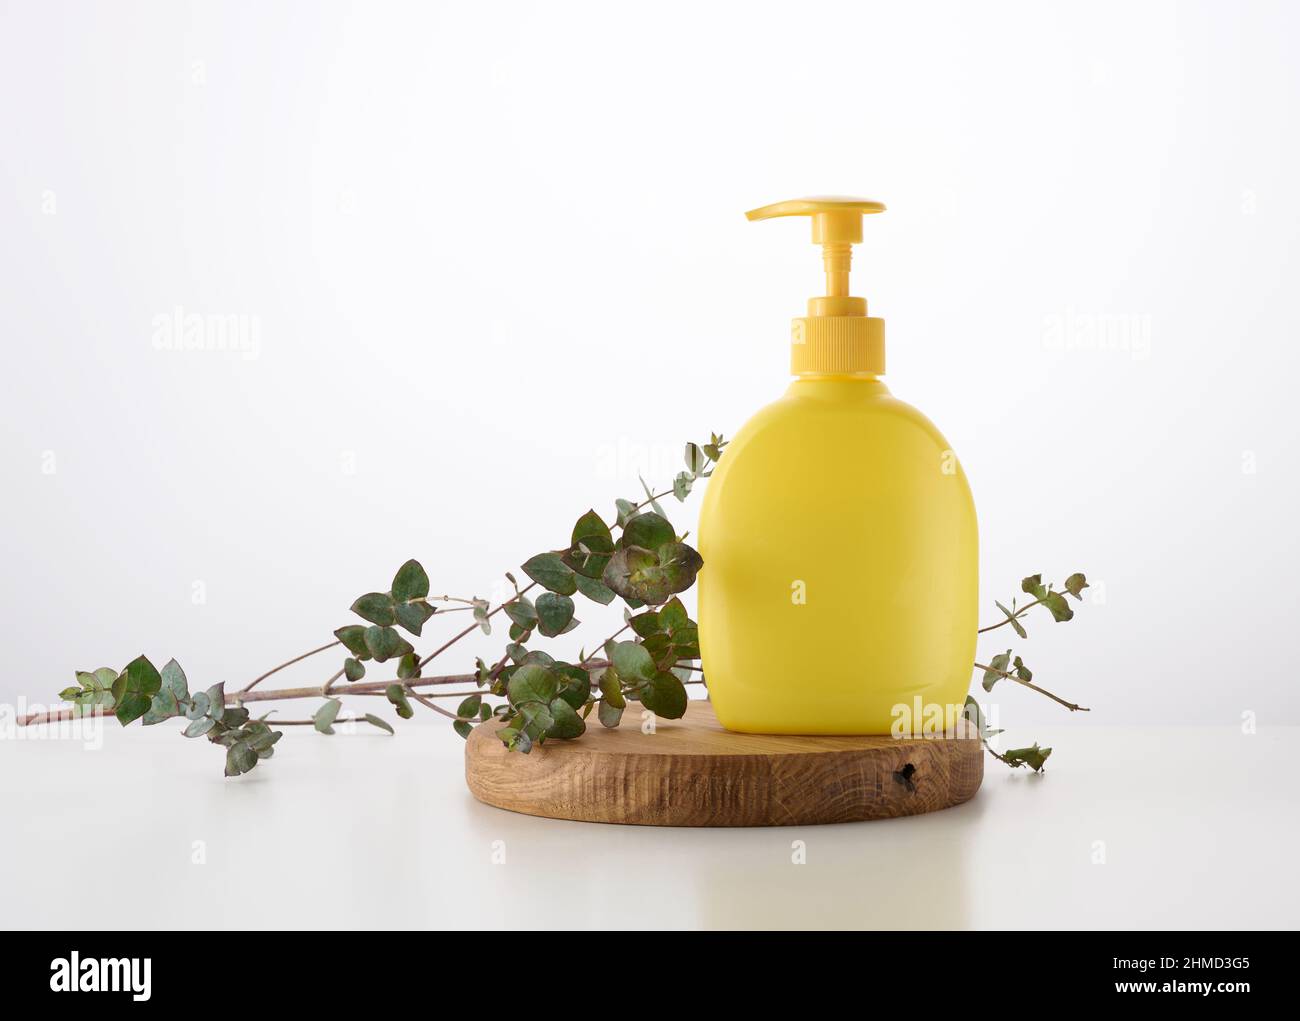 https://c8.alamy.com/comp/2HMD3G5/yellow-plastic-container-with-a-dispenser-on-a-wooden-background-and-a-branch-of-eucalyptus-on-a-white-background-container-for-liquid-soap-shampoo-2HMD3G5.jpg